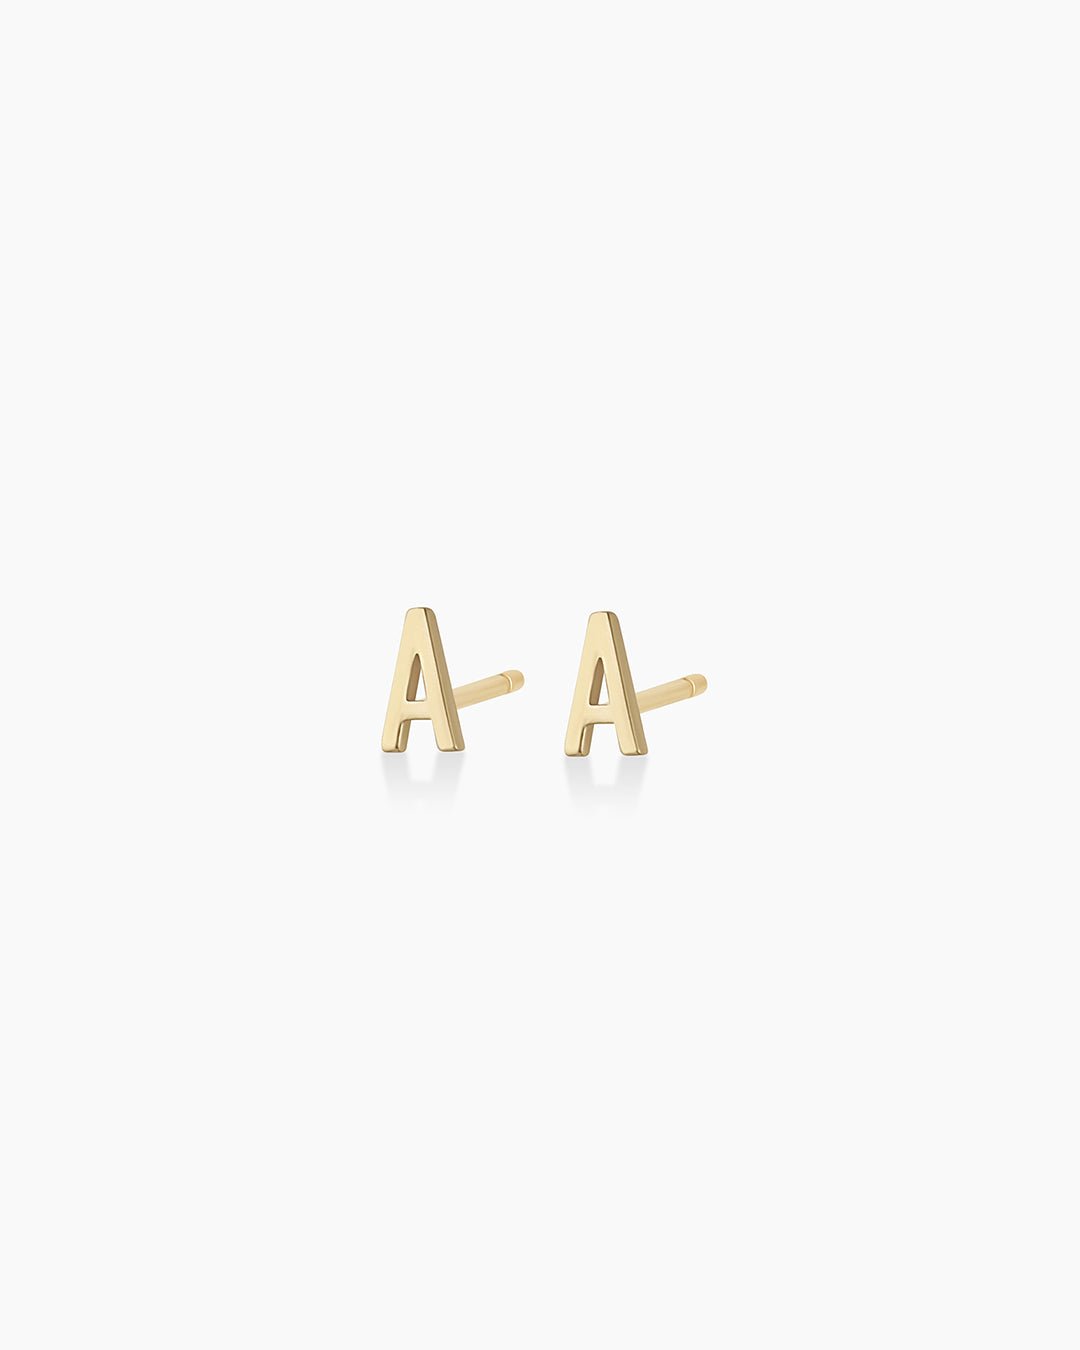 Alphabet earring stud || option::14k Solid Gold, A, Pair